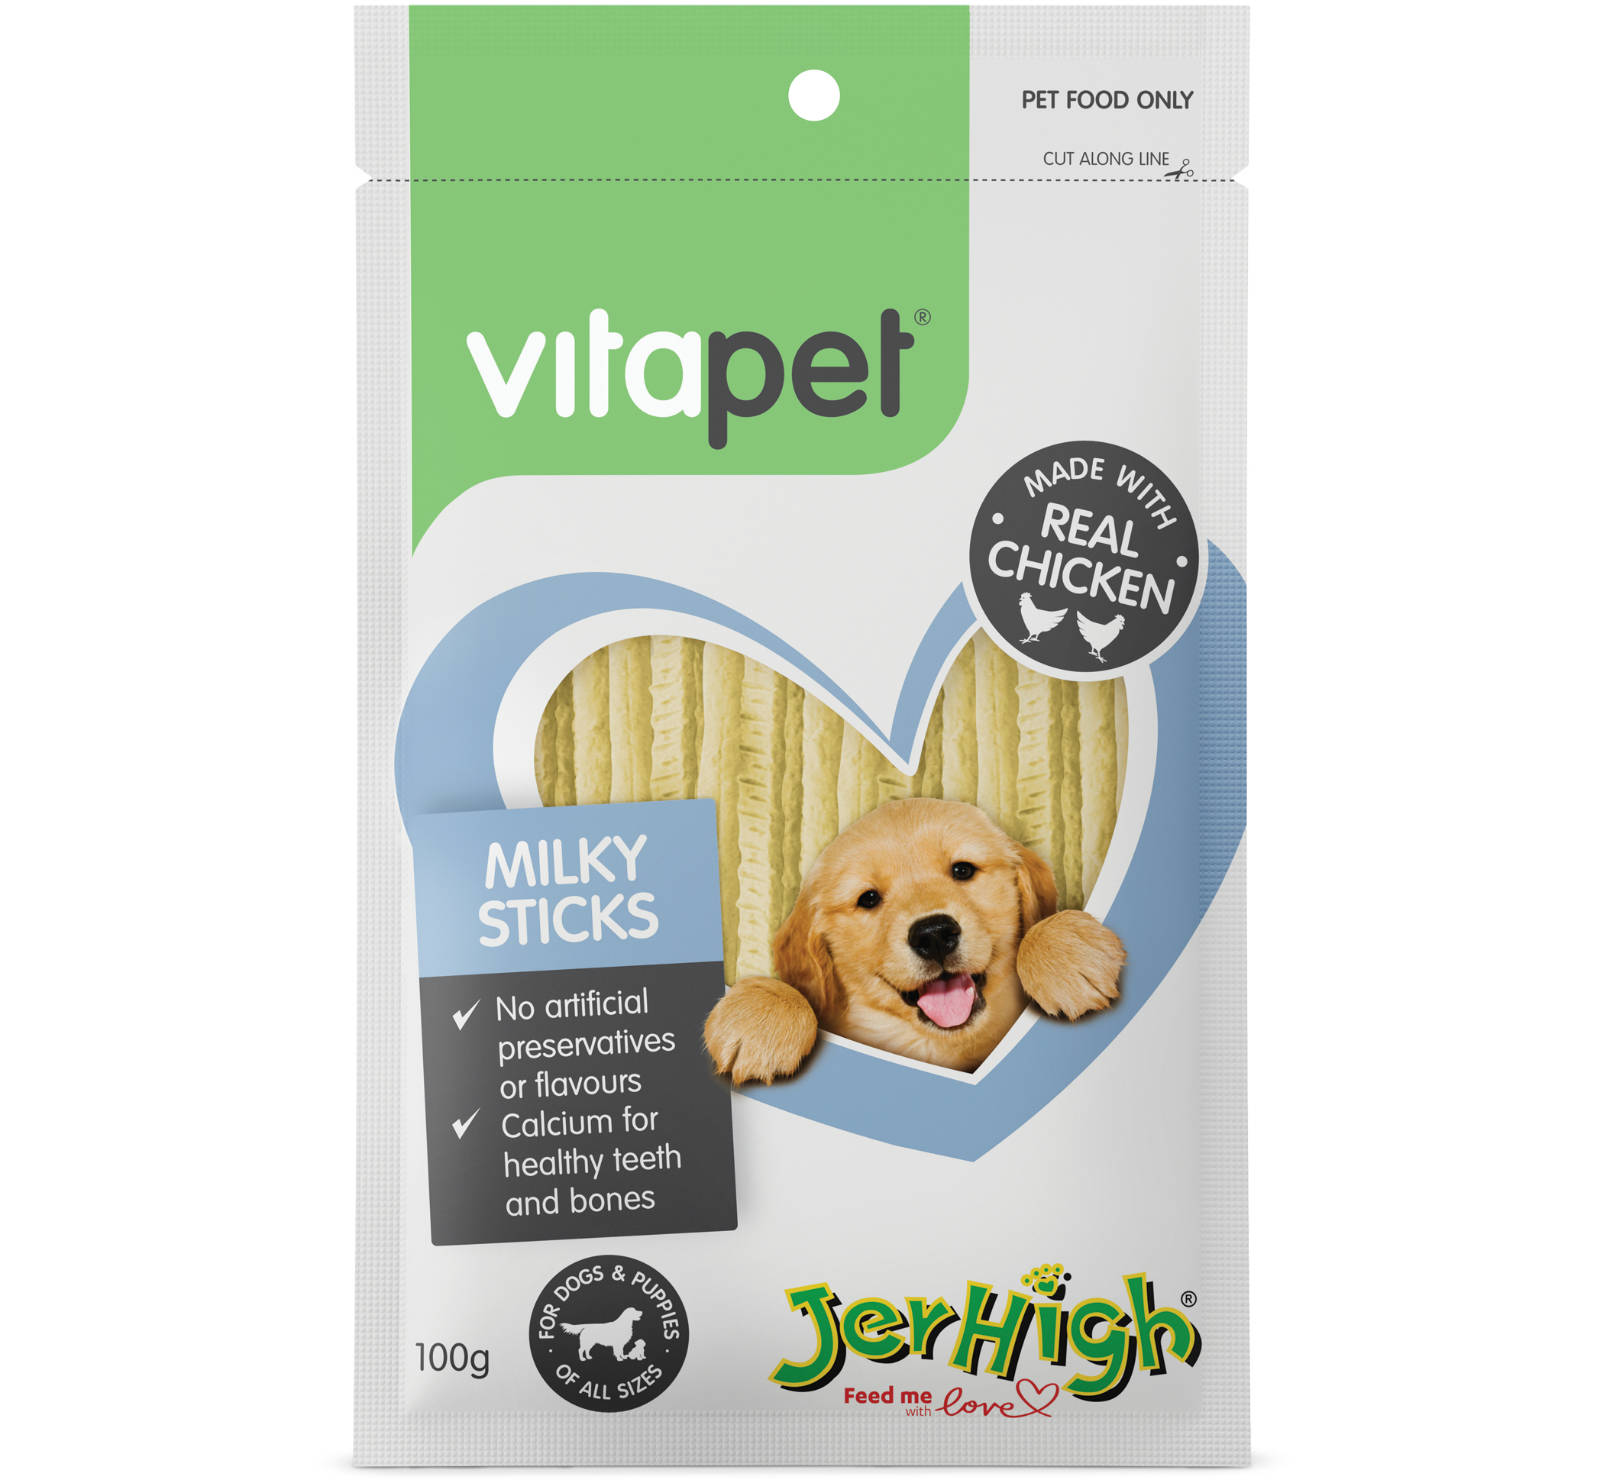 vitapet clippers